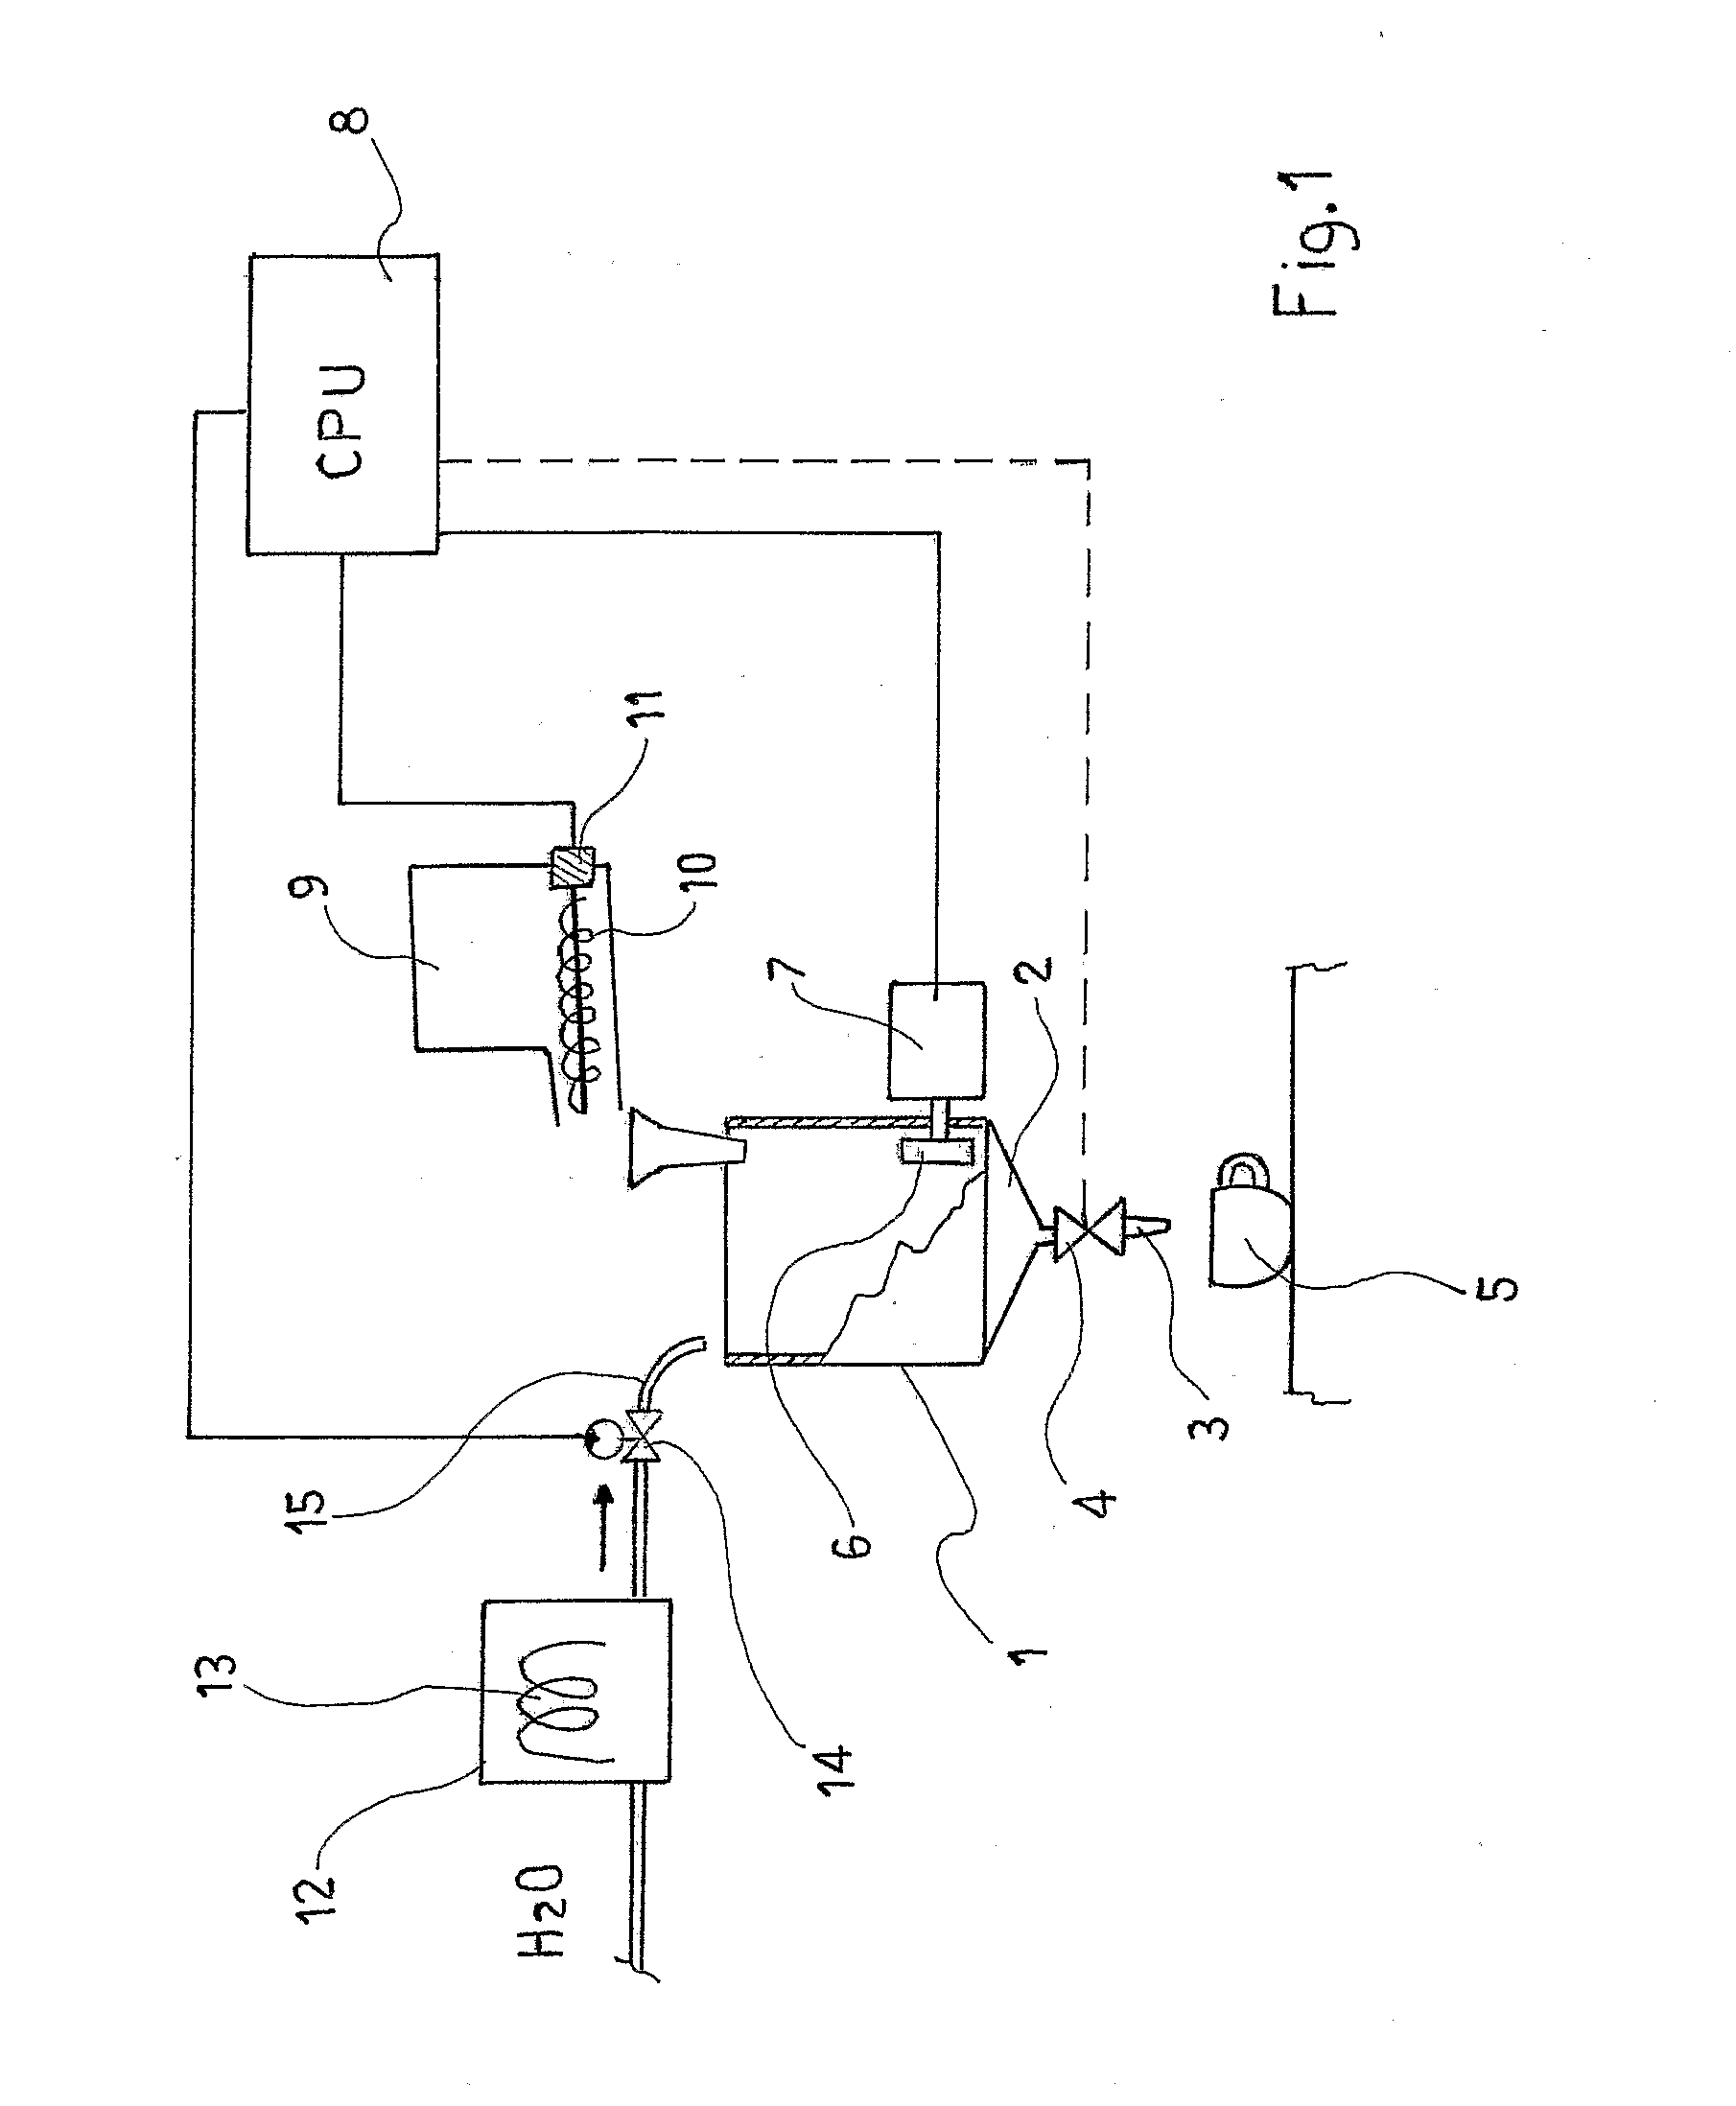 Method and Apparatus for Preparing Beverages from Soluble Products